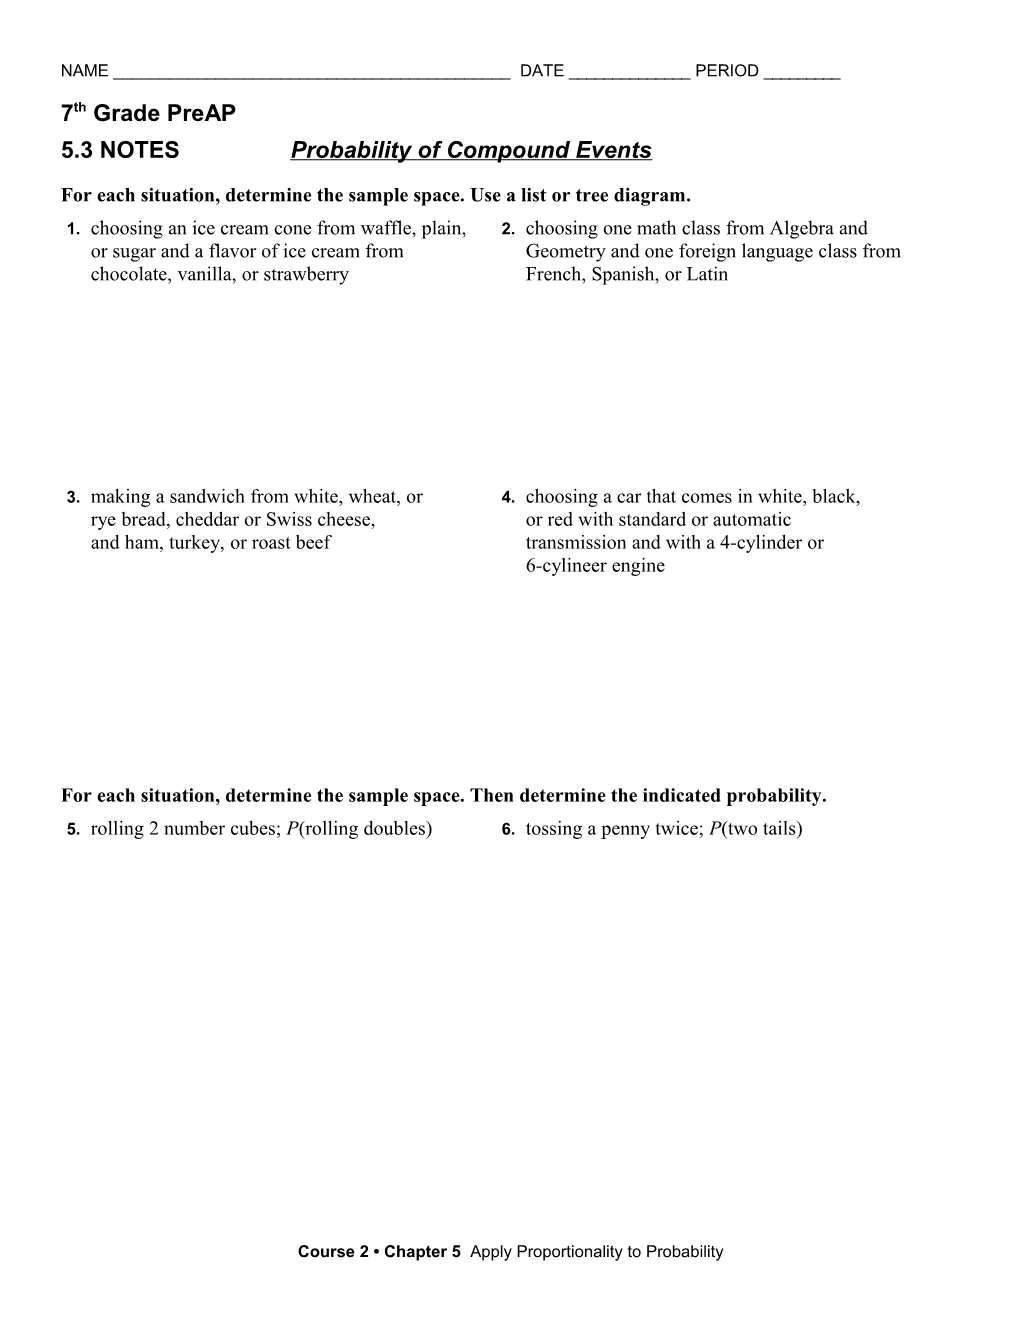 5.3 NOTES Probability of Compound Events